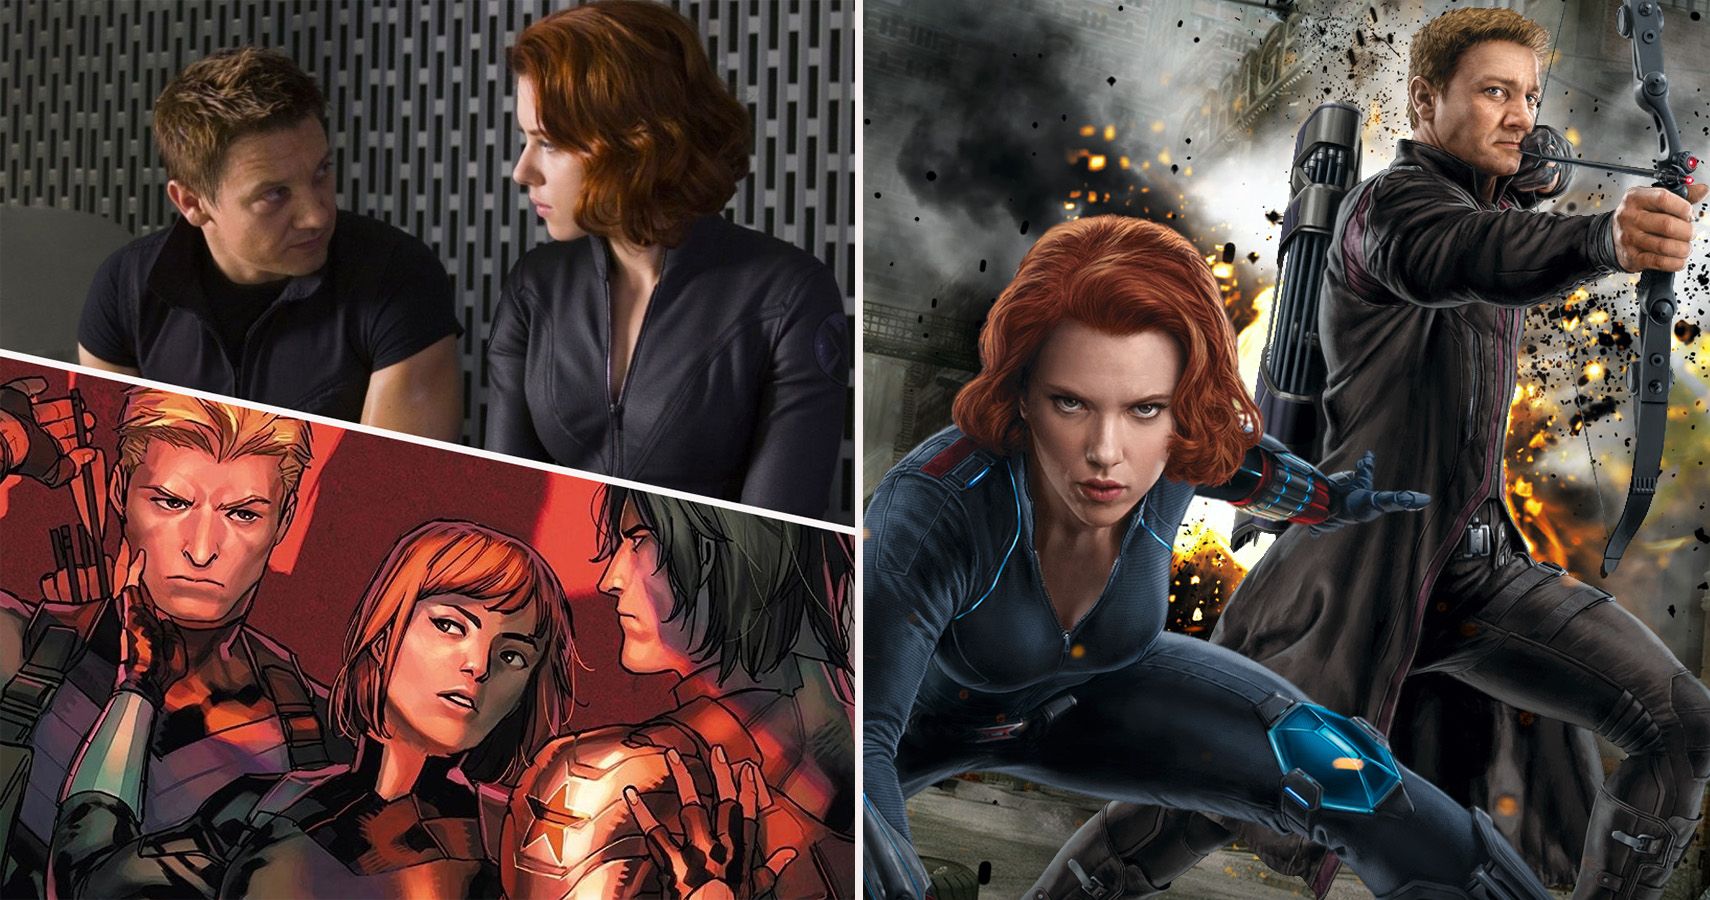 it seems that the potential romance between hawkeye and black widow